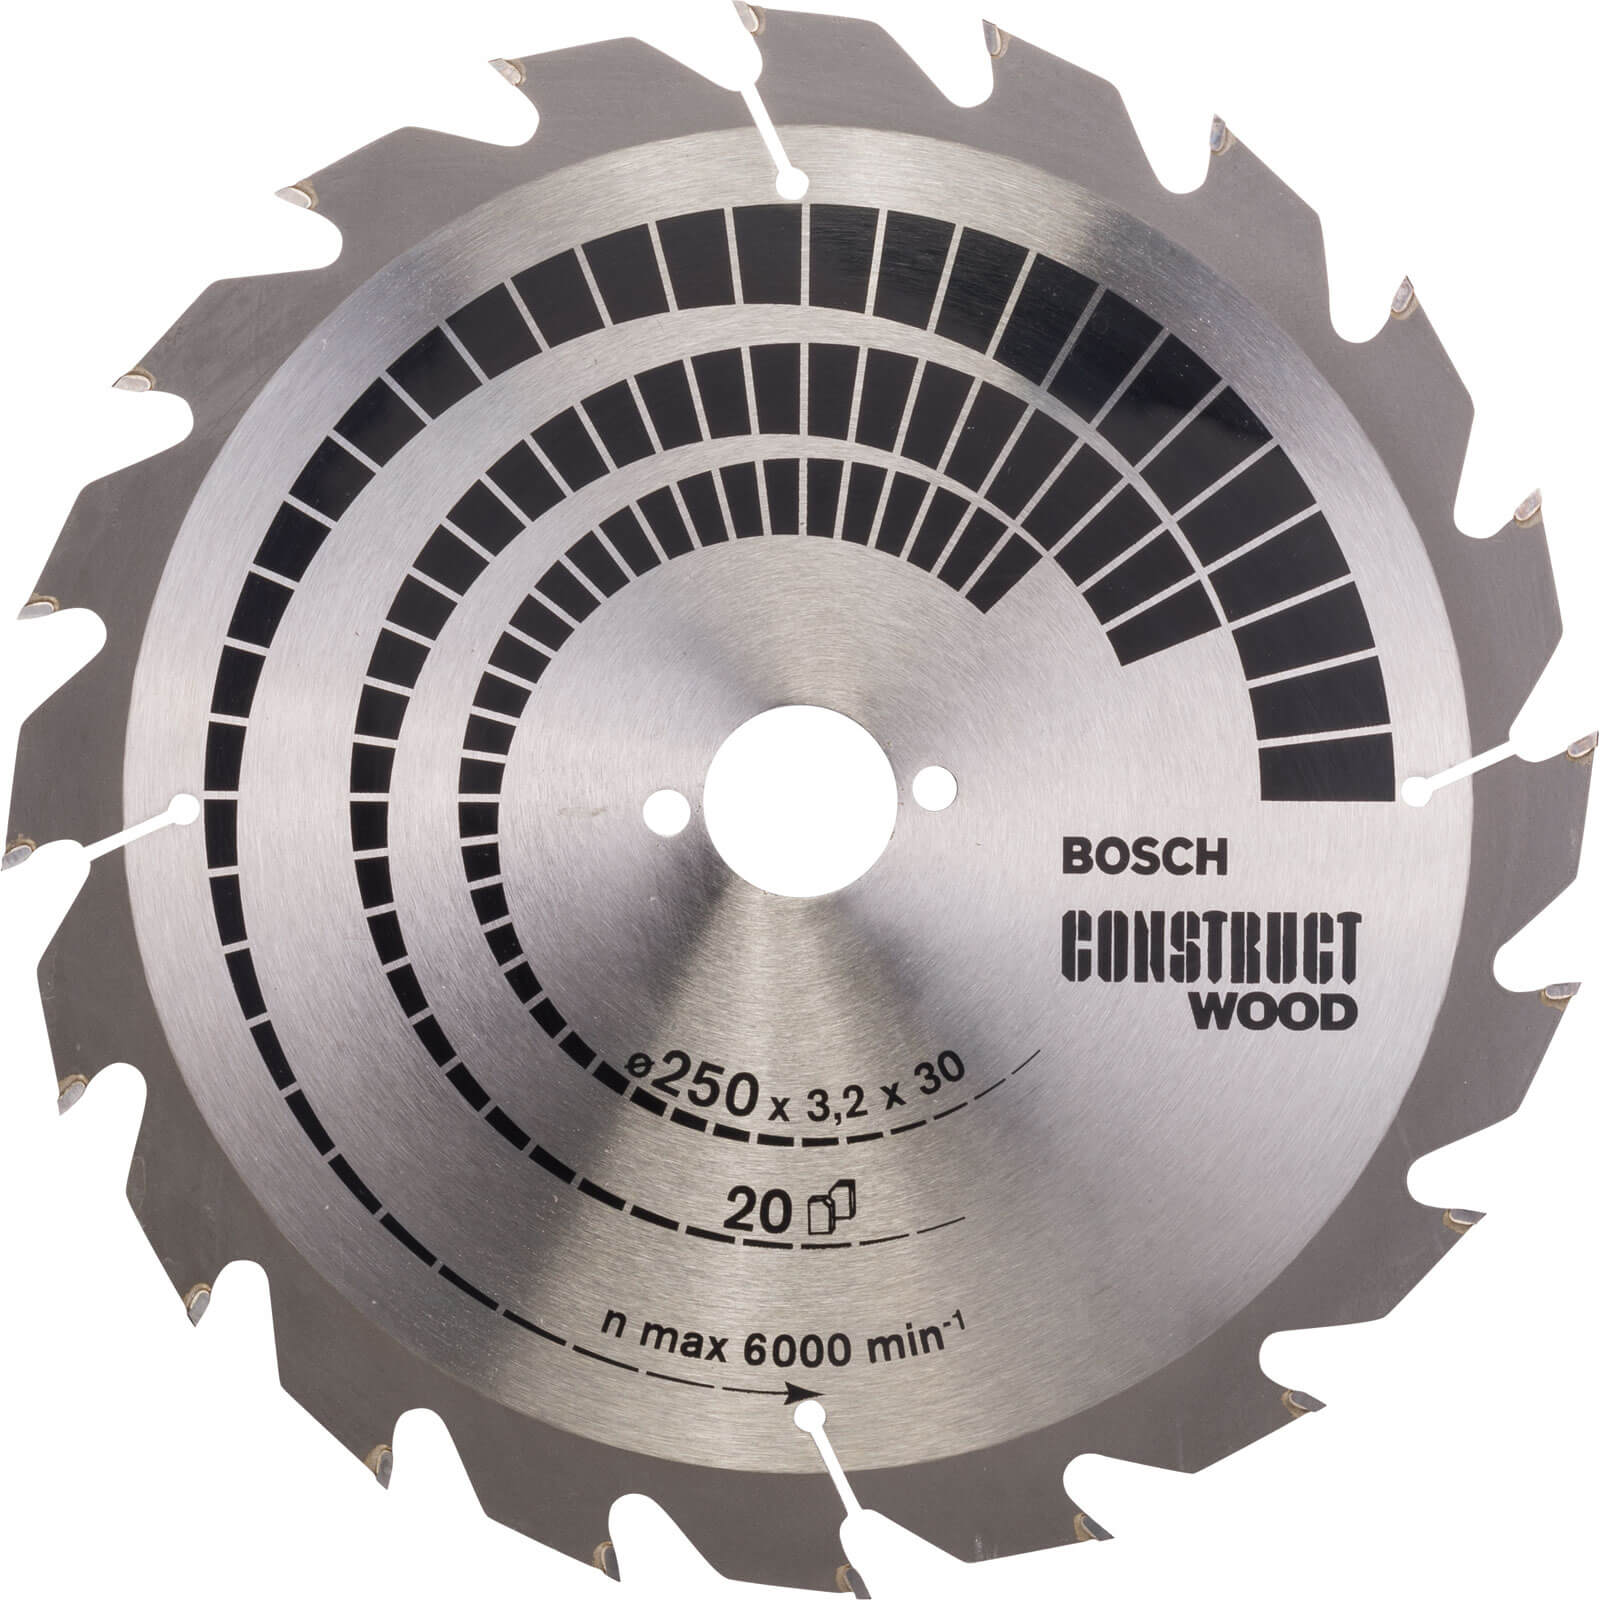 Photos - Power Tool Accessory Bosch Construct Nail Proof Wood Cutting Table Saw Blade 250mm 20T 30mm 